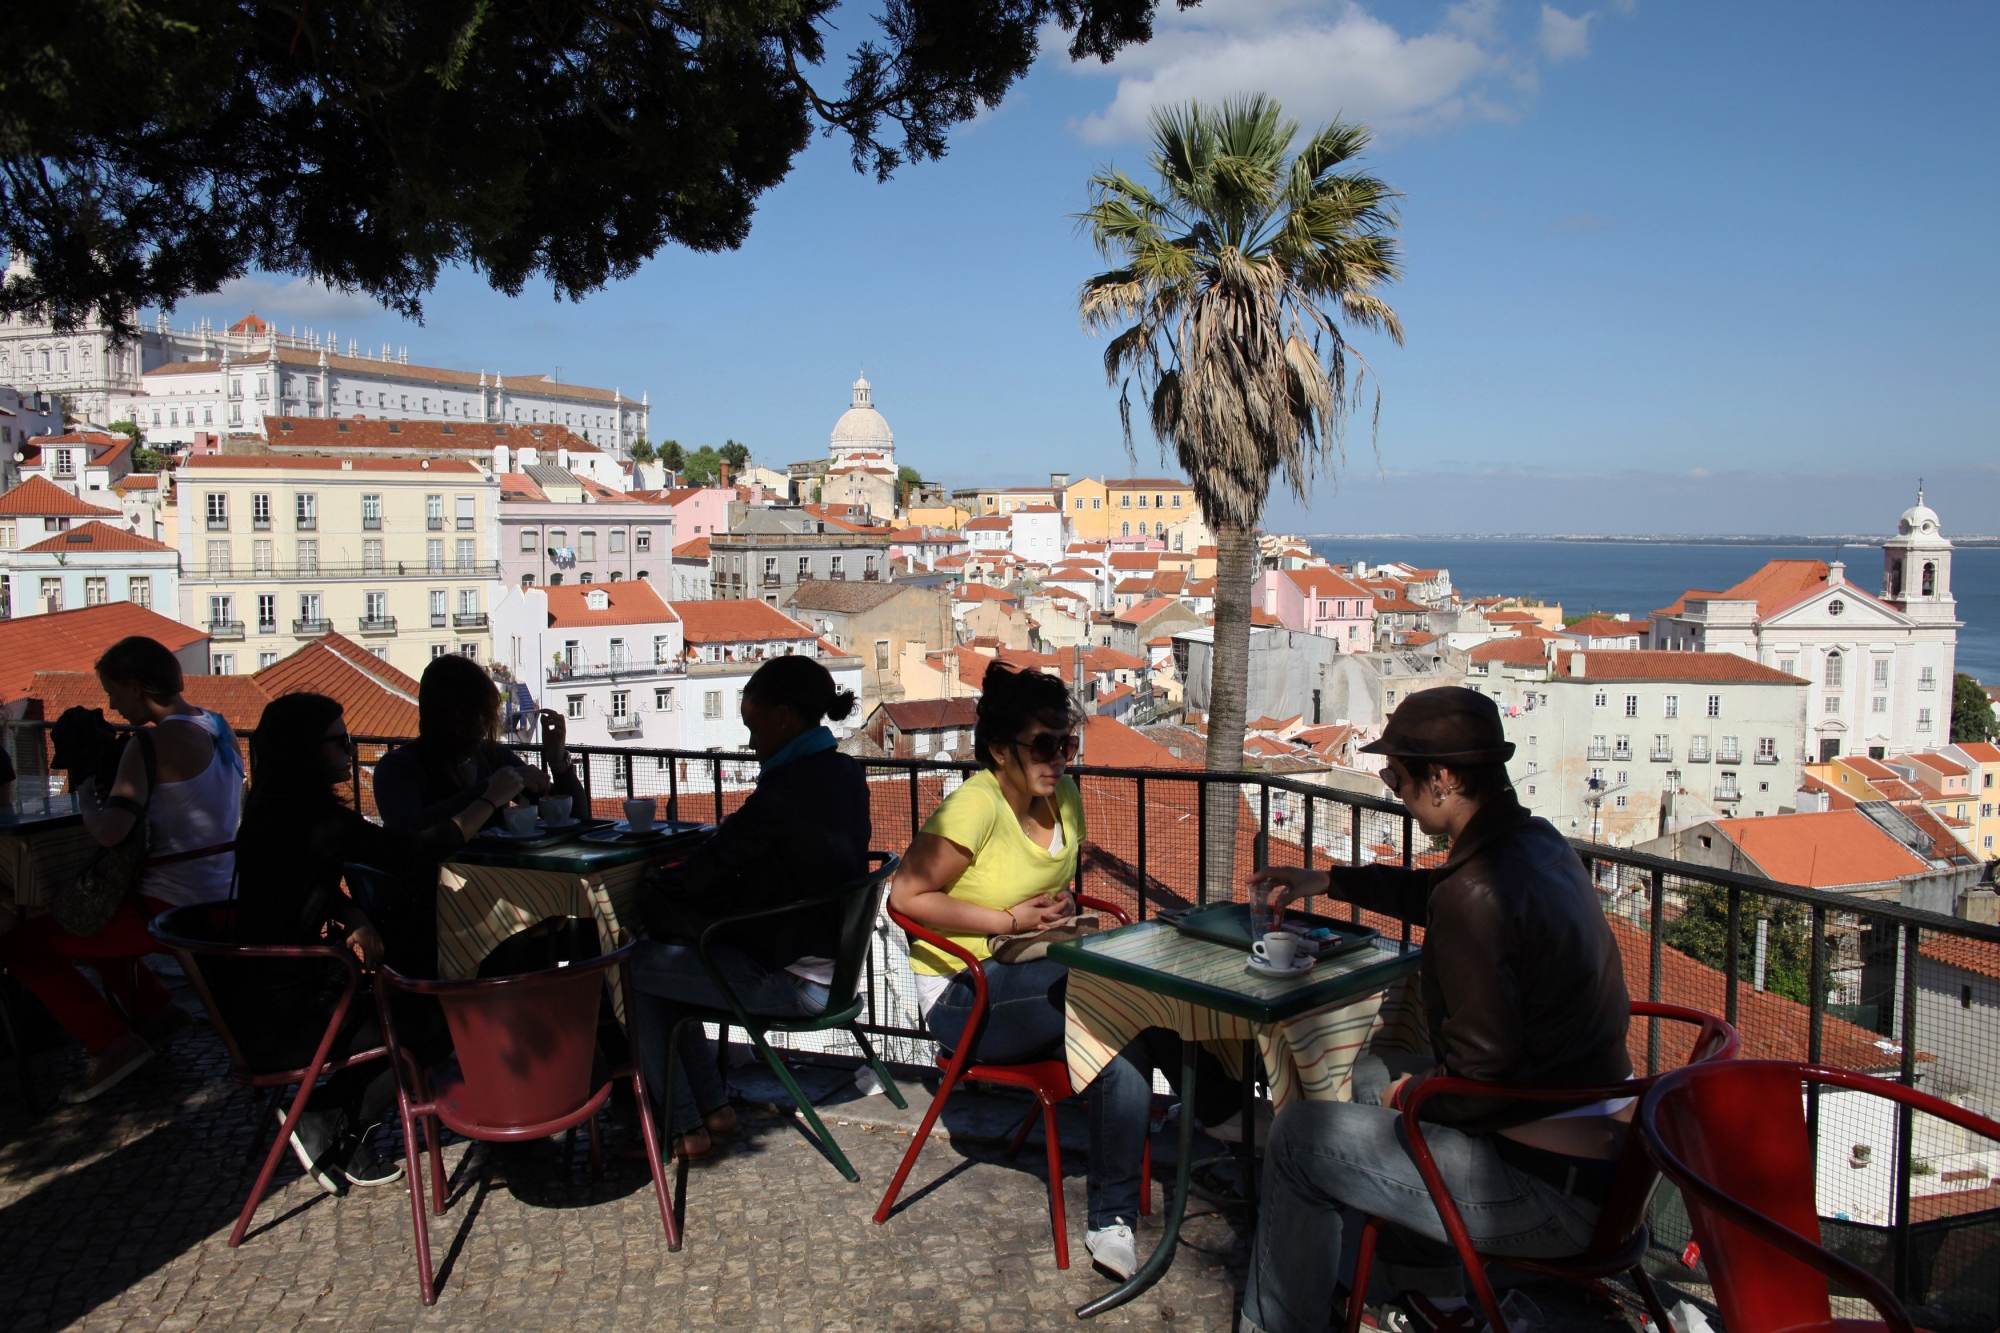 This April 9, 2011 photos shows tourists as they sit in the shade at an outdoor cafe overlooking Lisbon's Alfama old quarter along the Tagus river in Portugal. Portugal is immersed in debt and is widely expected to receive a Greek-style bailout by June. But travelers willing to jump aboard this economic rollercoaster could find bargains in a country small enough to tour in a week's time. (AP Photo/Armando Franca)